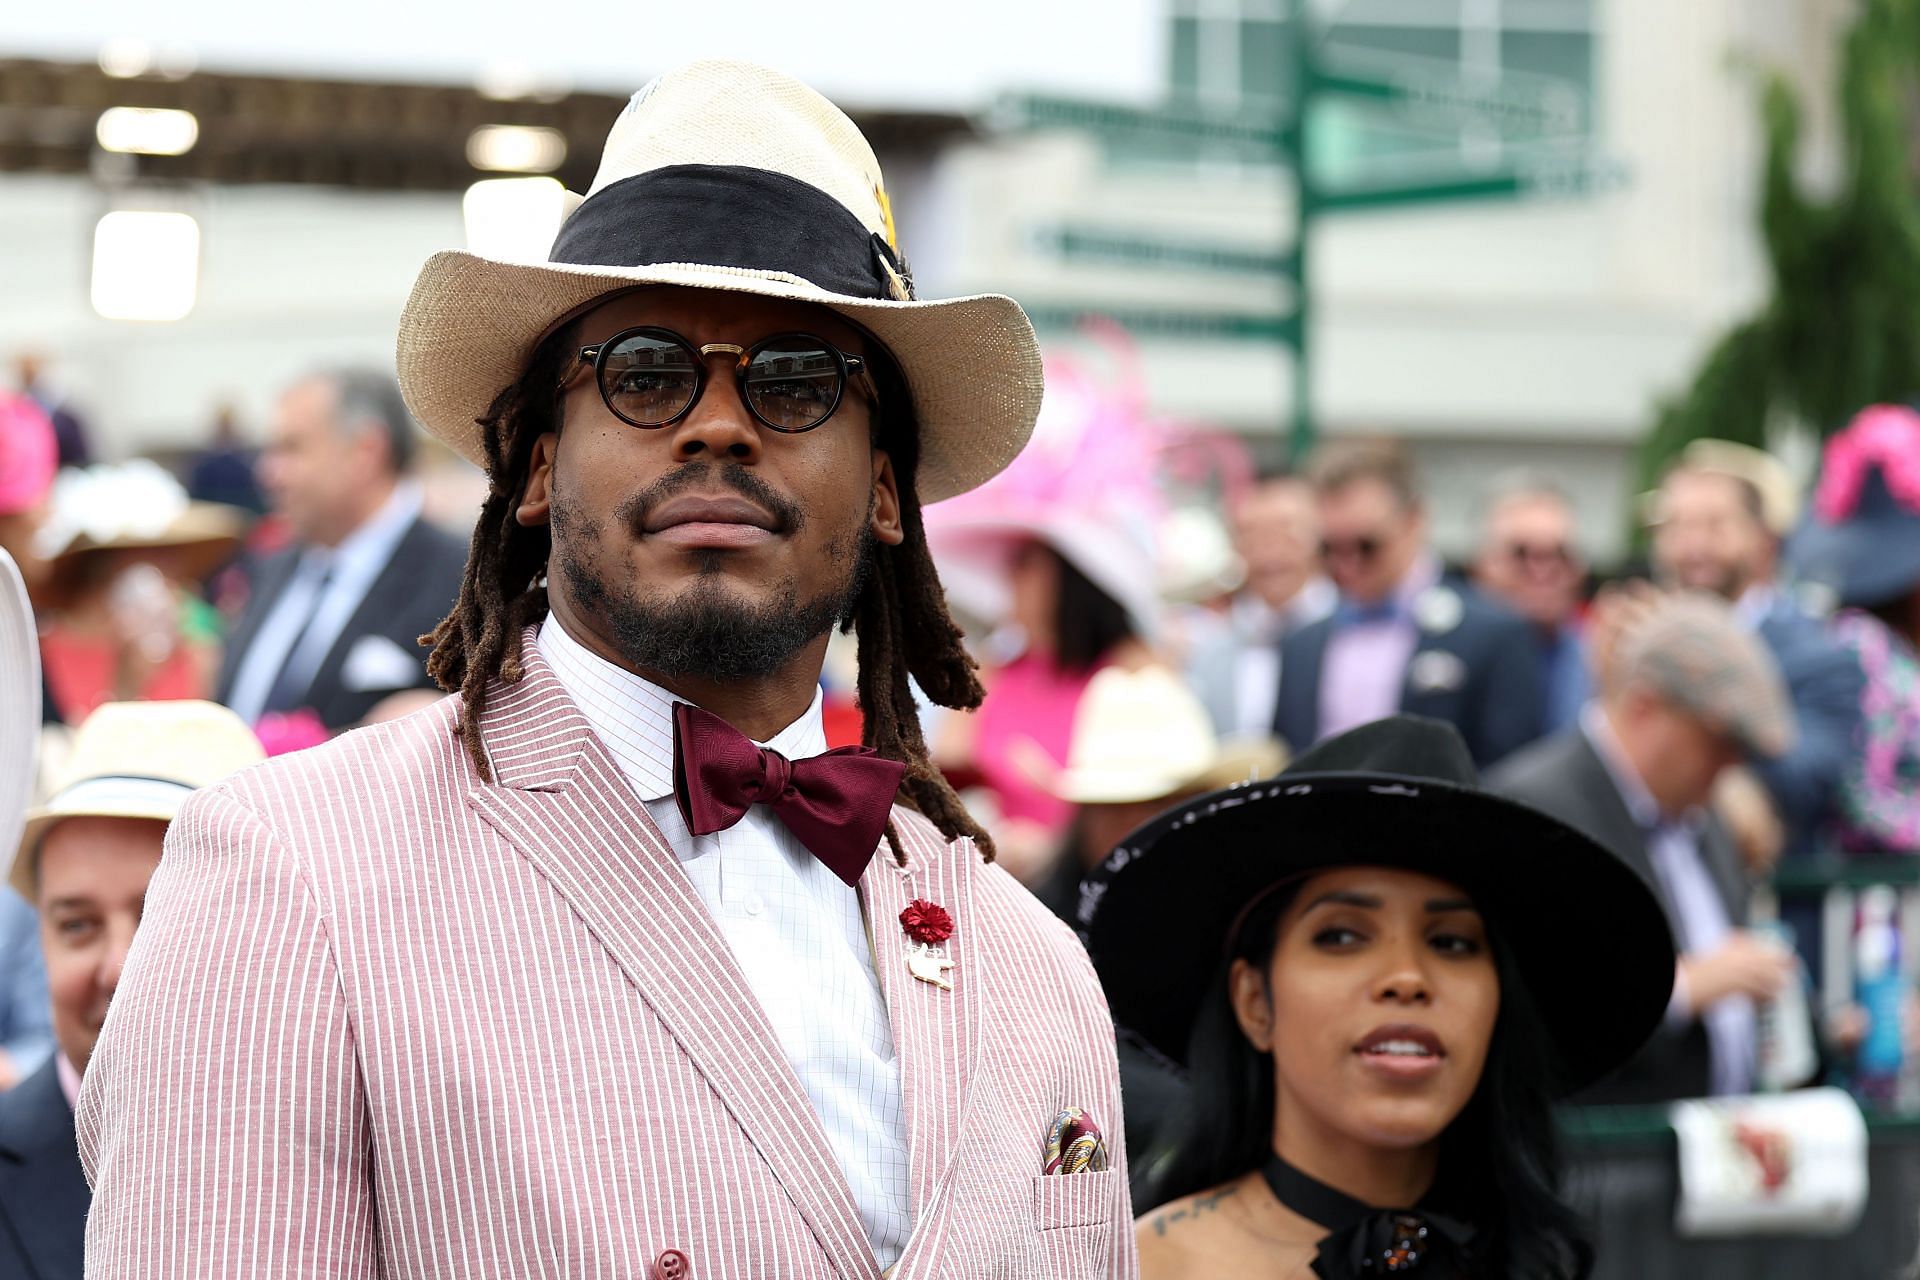 No. 1 at the 148th Kentucky Derby